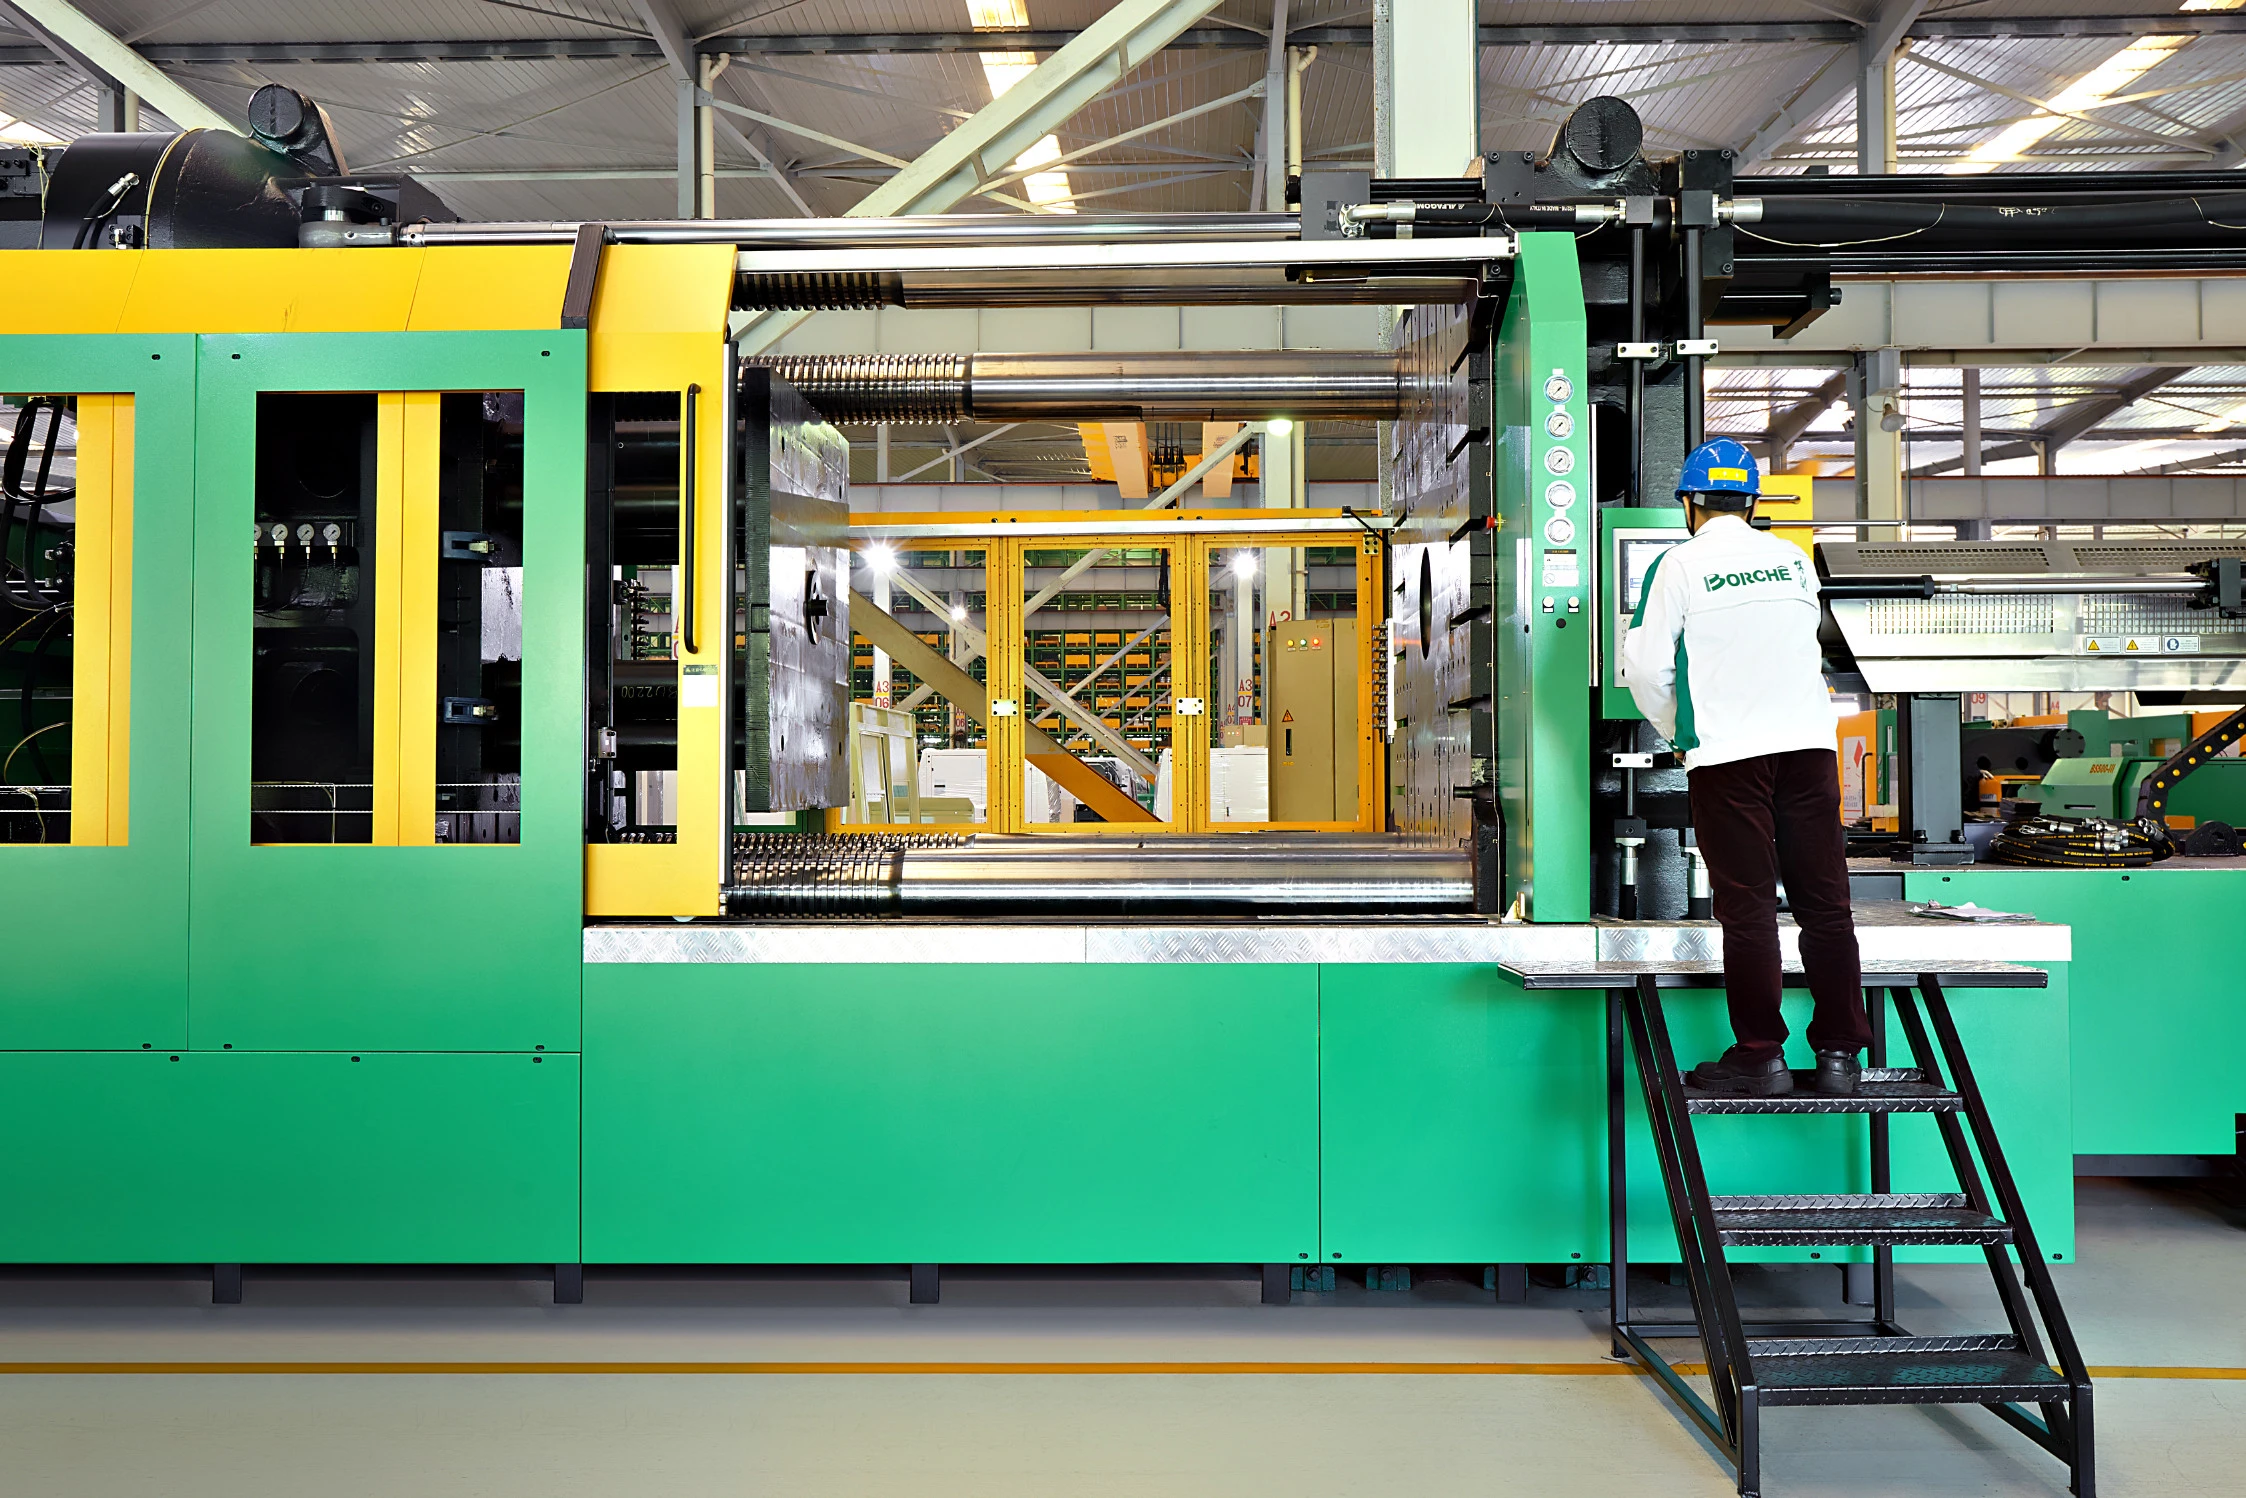 Top 3 Borche best selling injection molding machine, 120ton high quality low price injection moulding machine in China